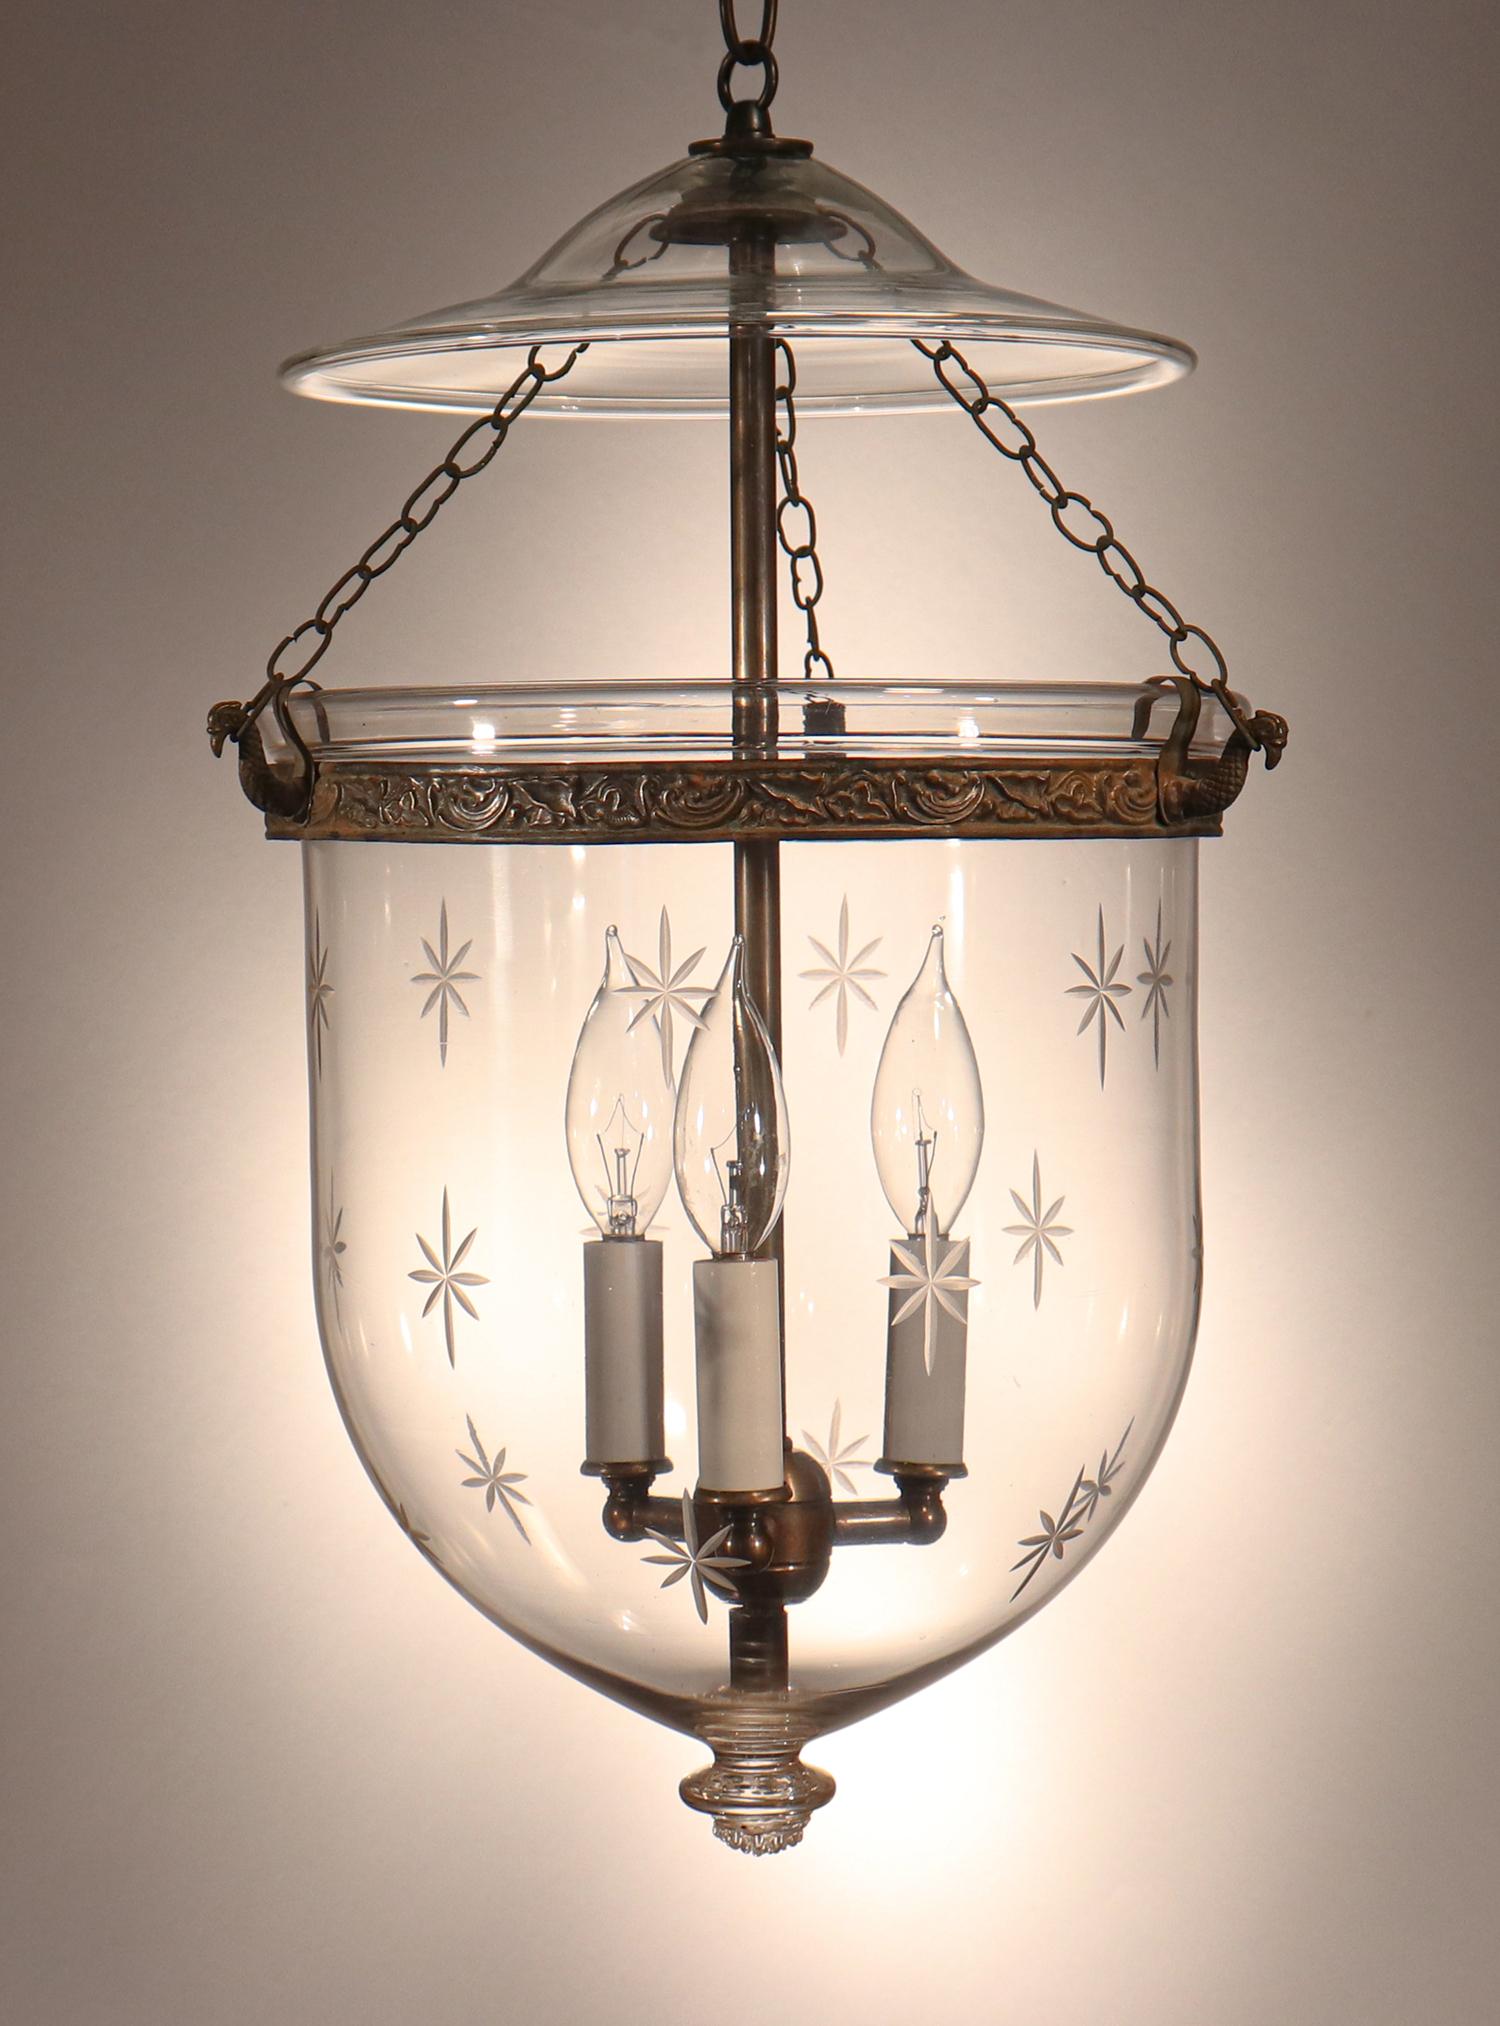 Victorian Antique Bell Jar Lantern with Etched Stars